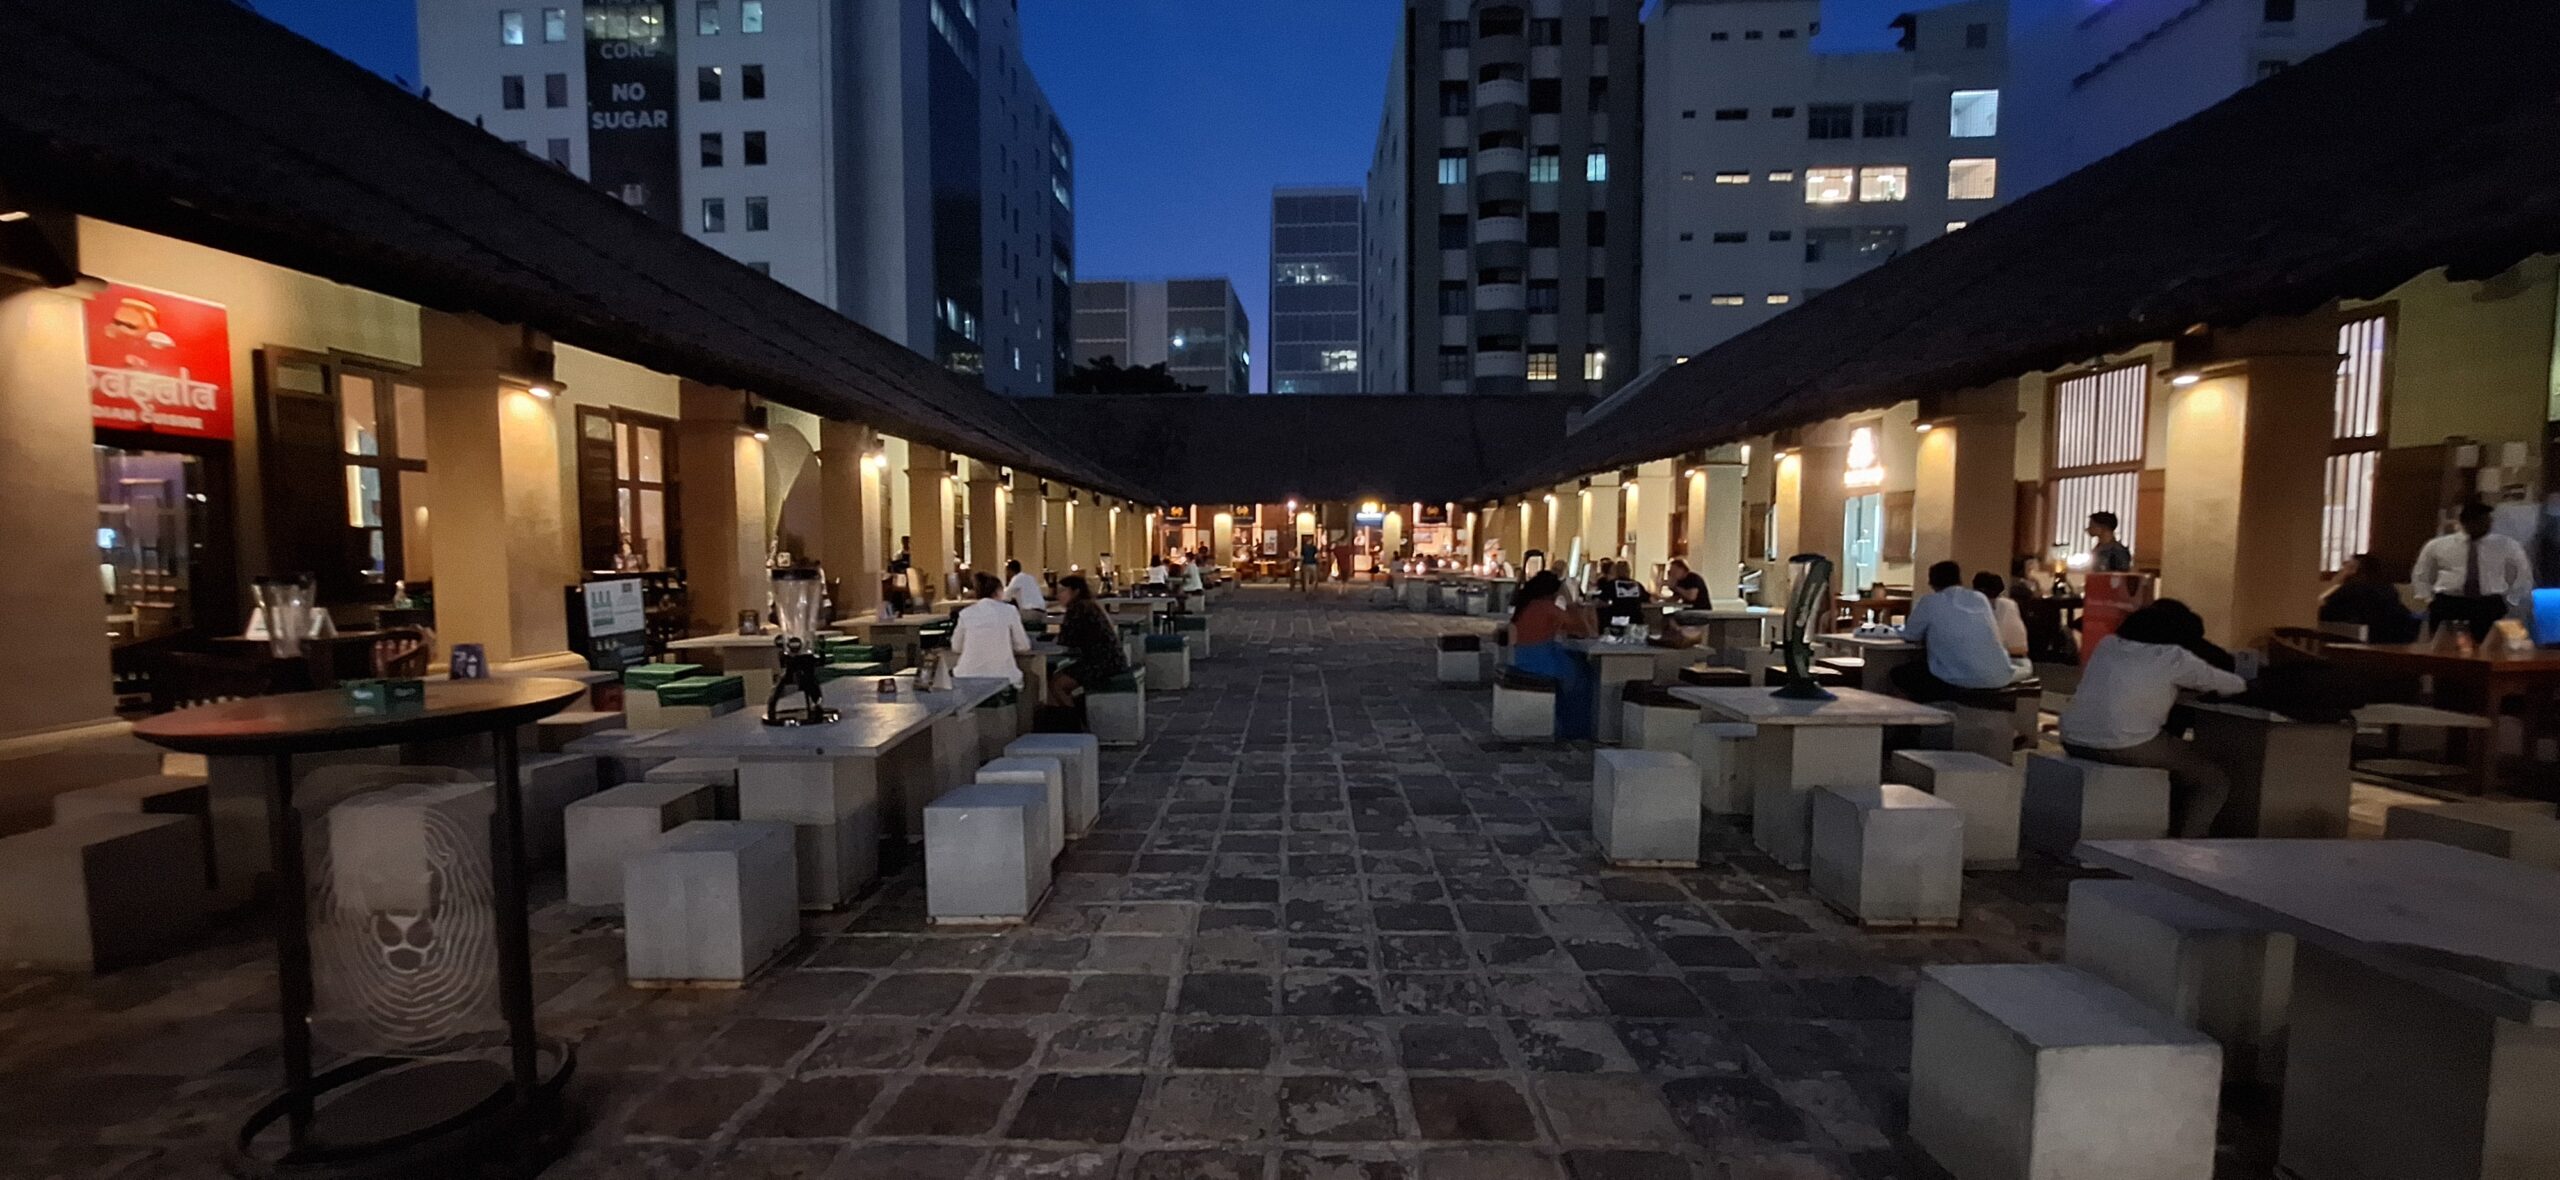 people sitting at tables in a courtyard